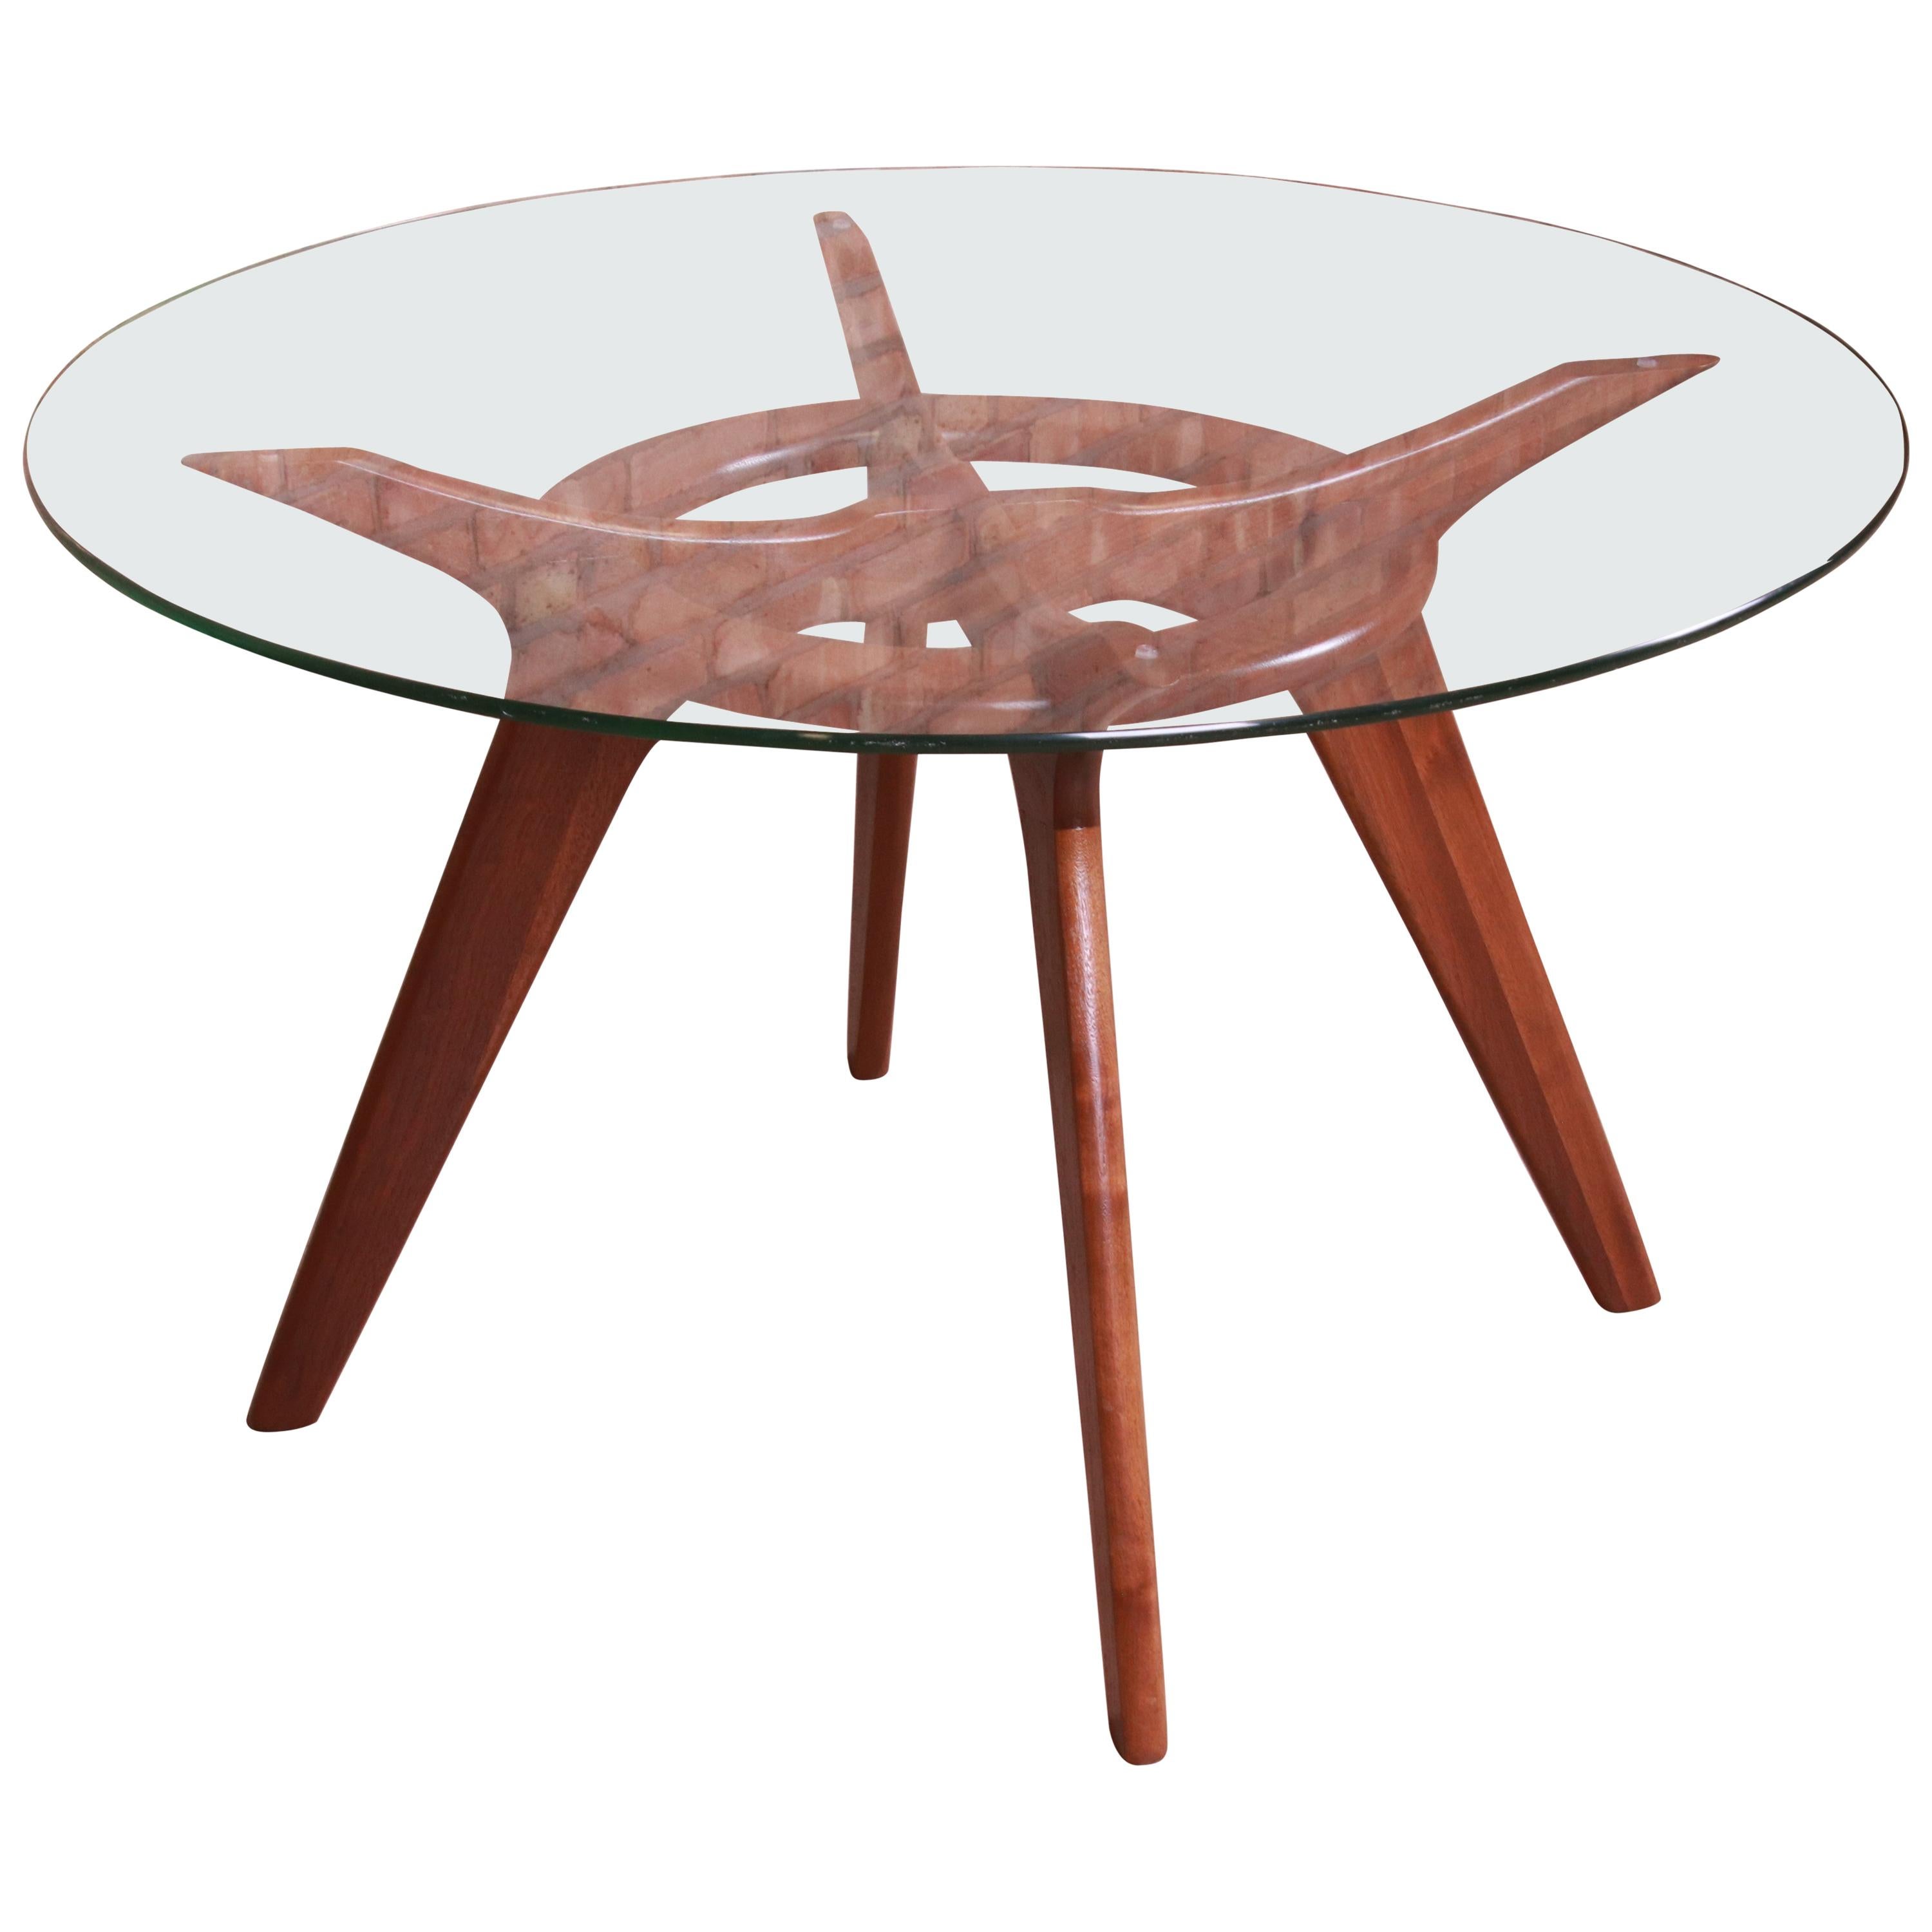 Adrian Pearsall Sculpted Walnut Glass Top "Compass" Dining Table, Refinished